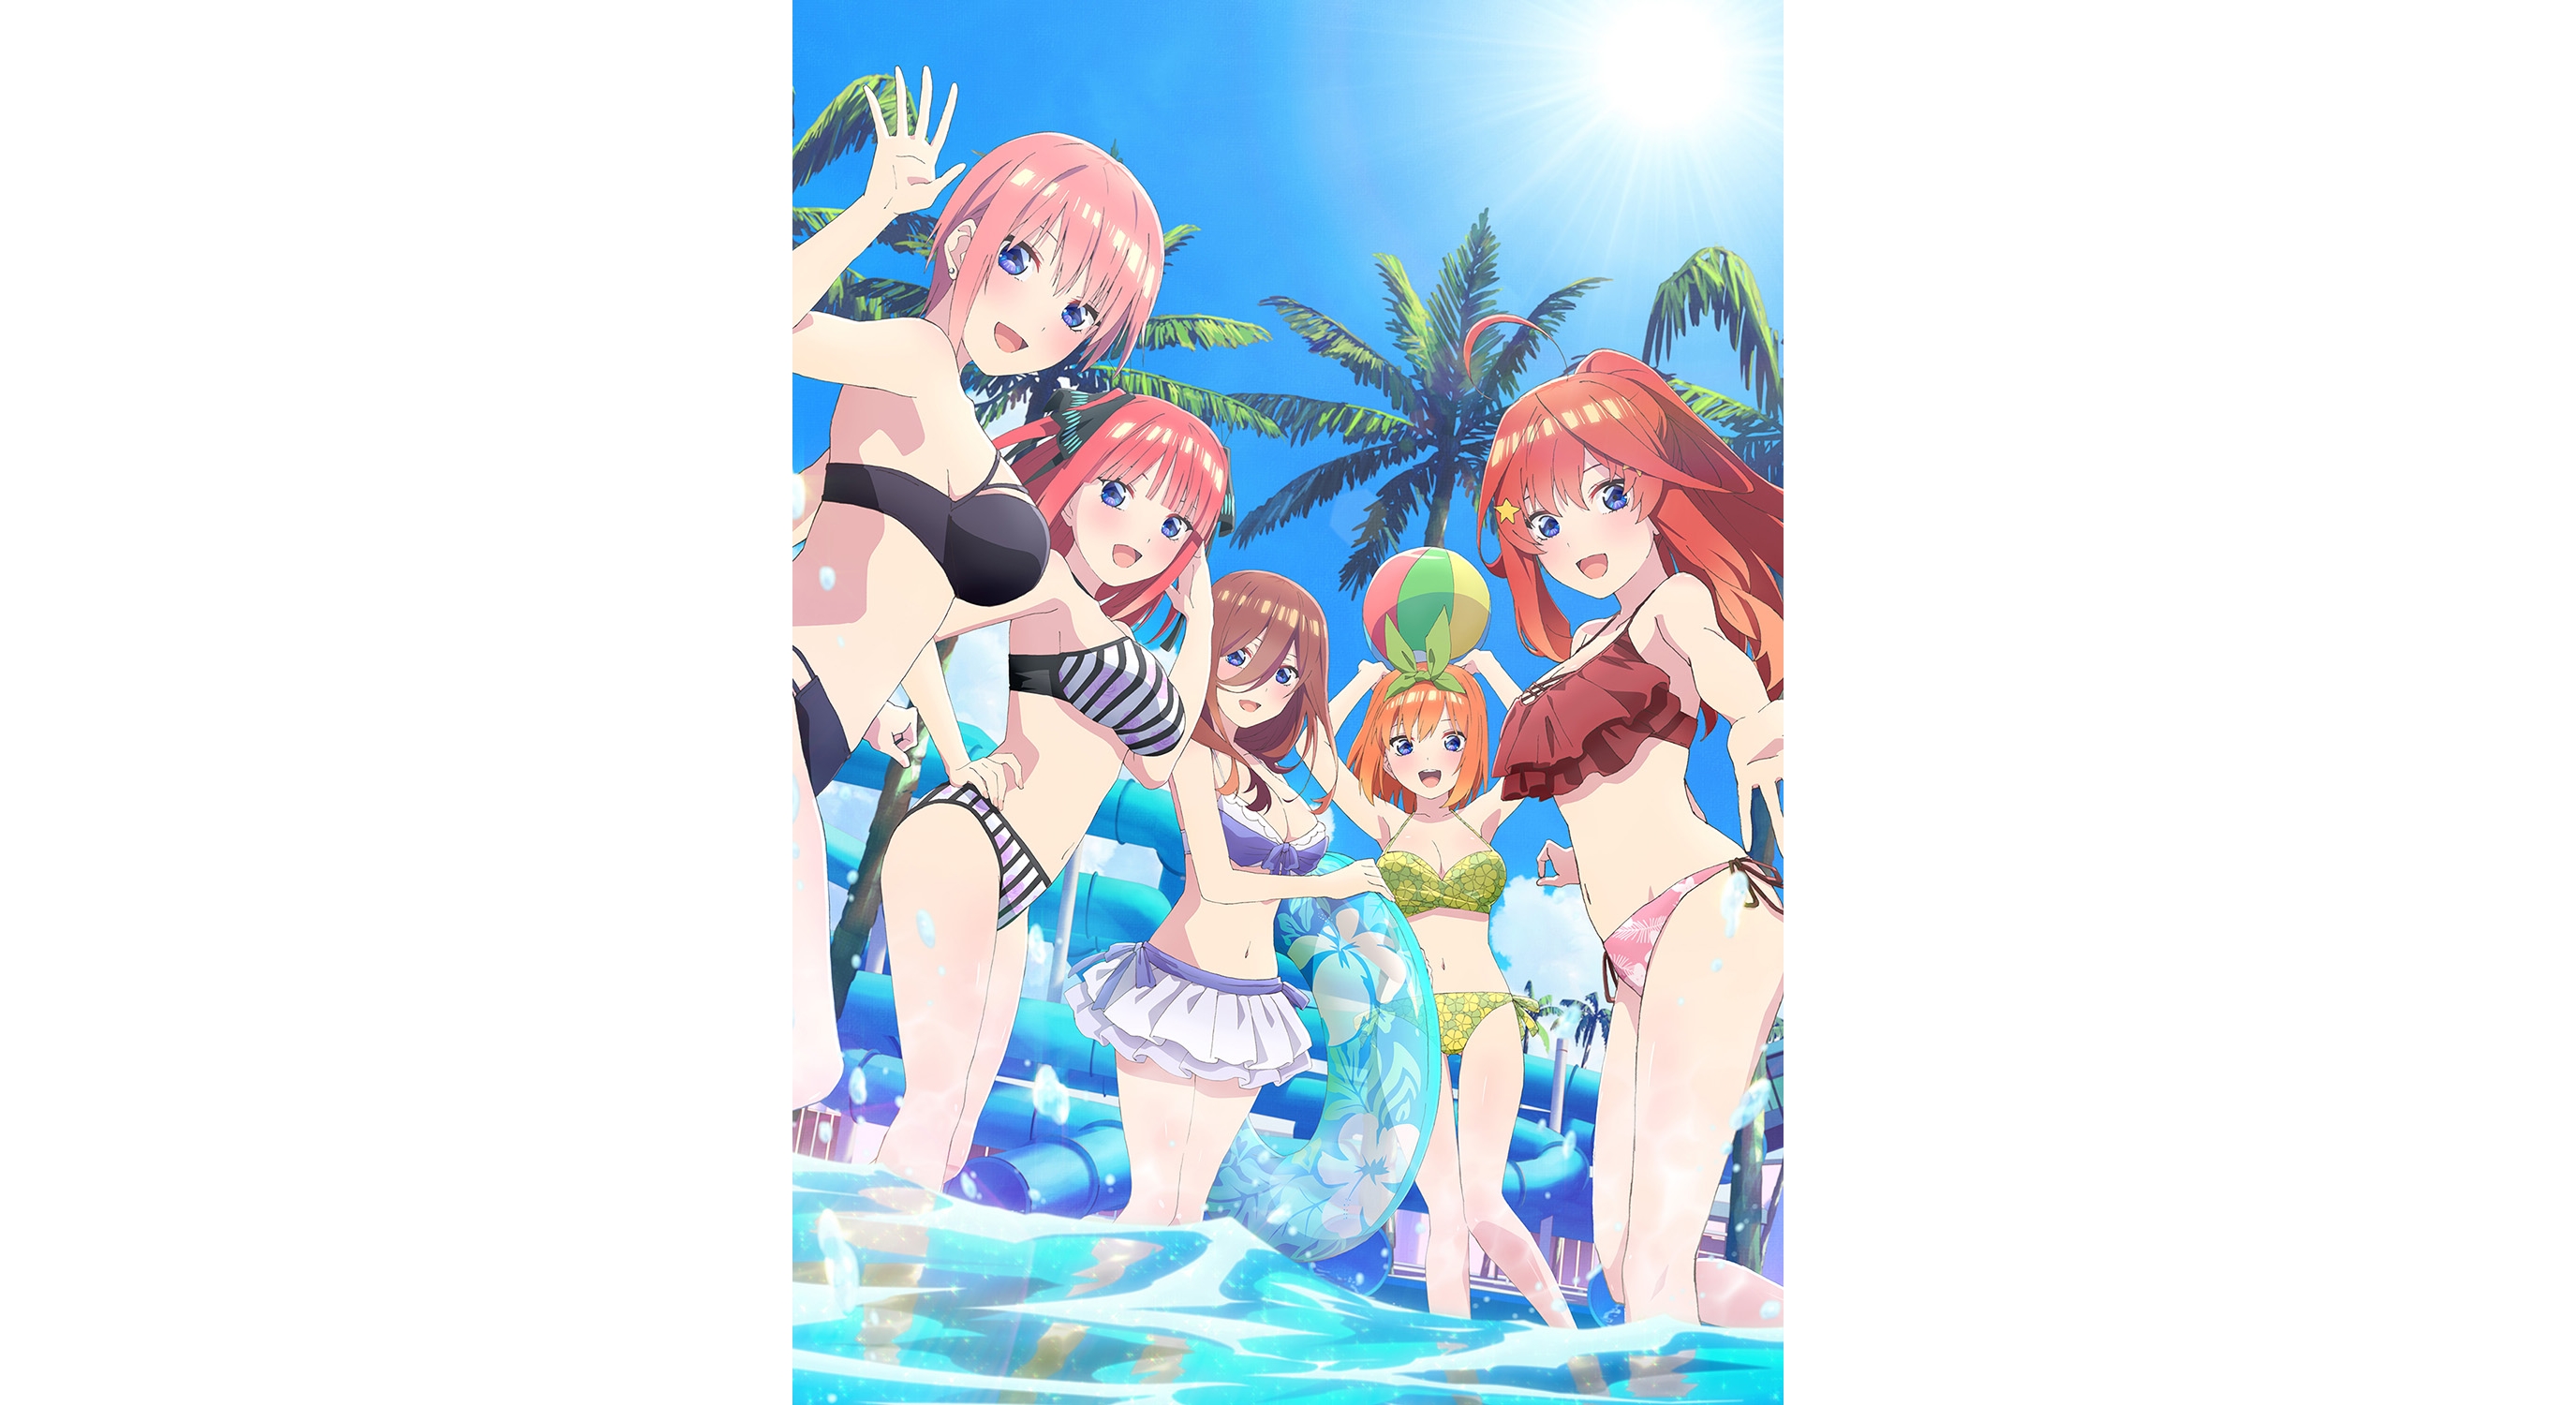 CDJapan : The Quintessential Quintuplets OP,Character Song Mini-album  with exclusive picture bonus!